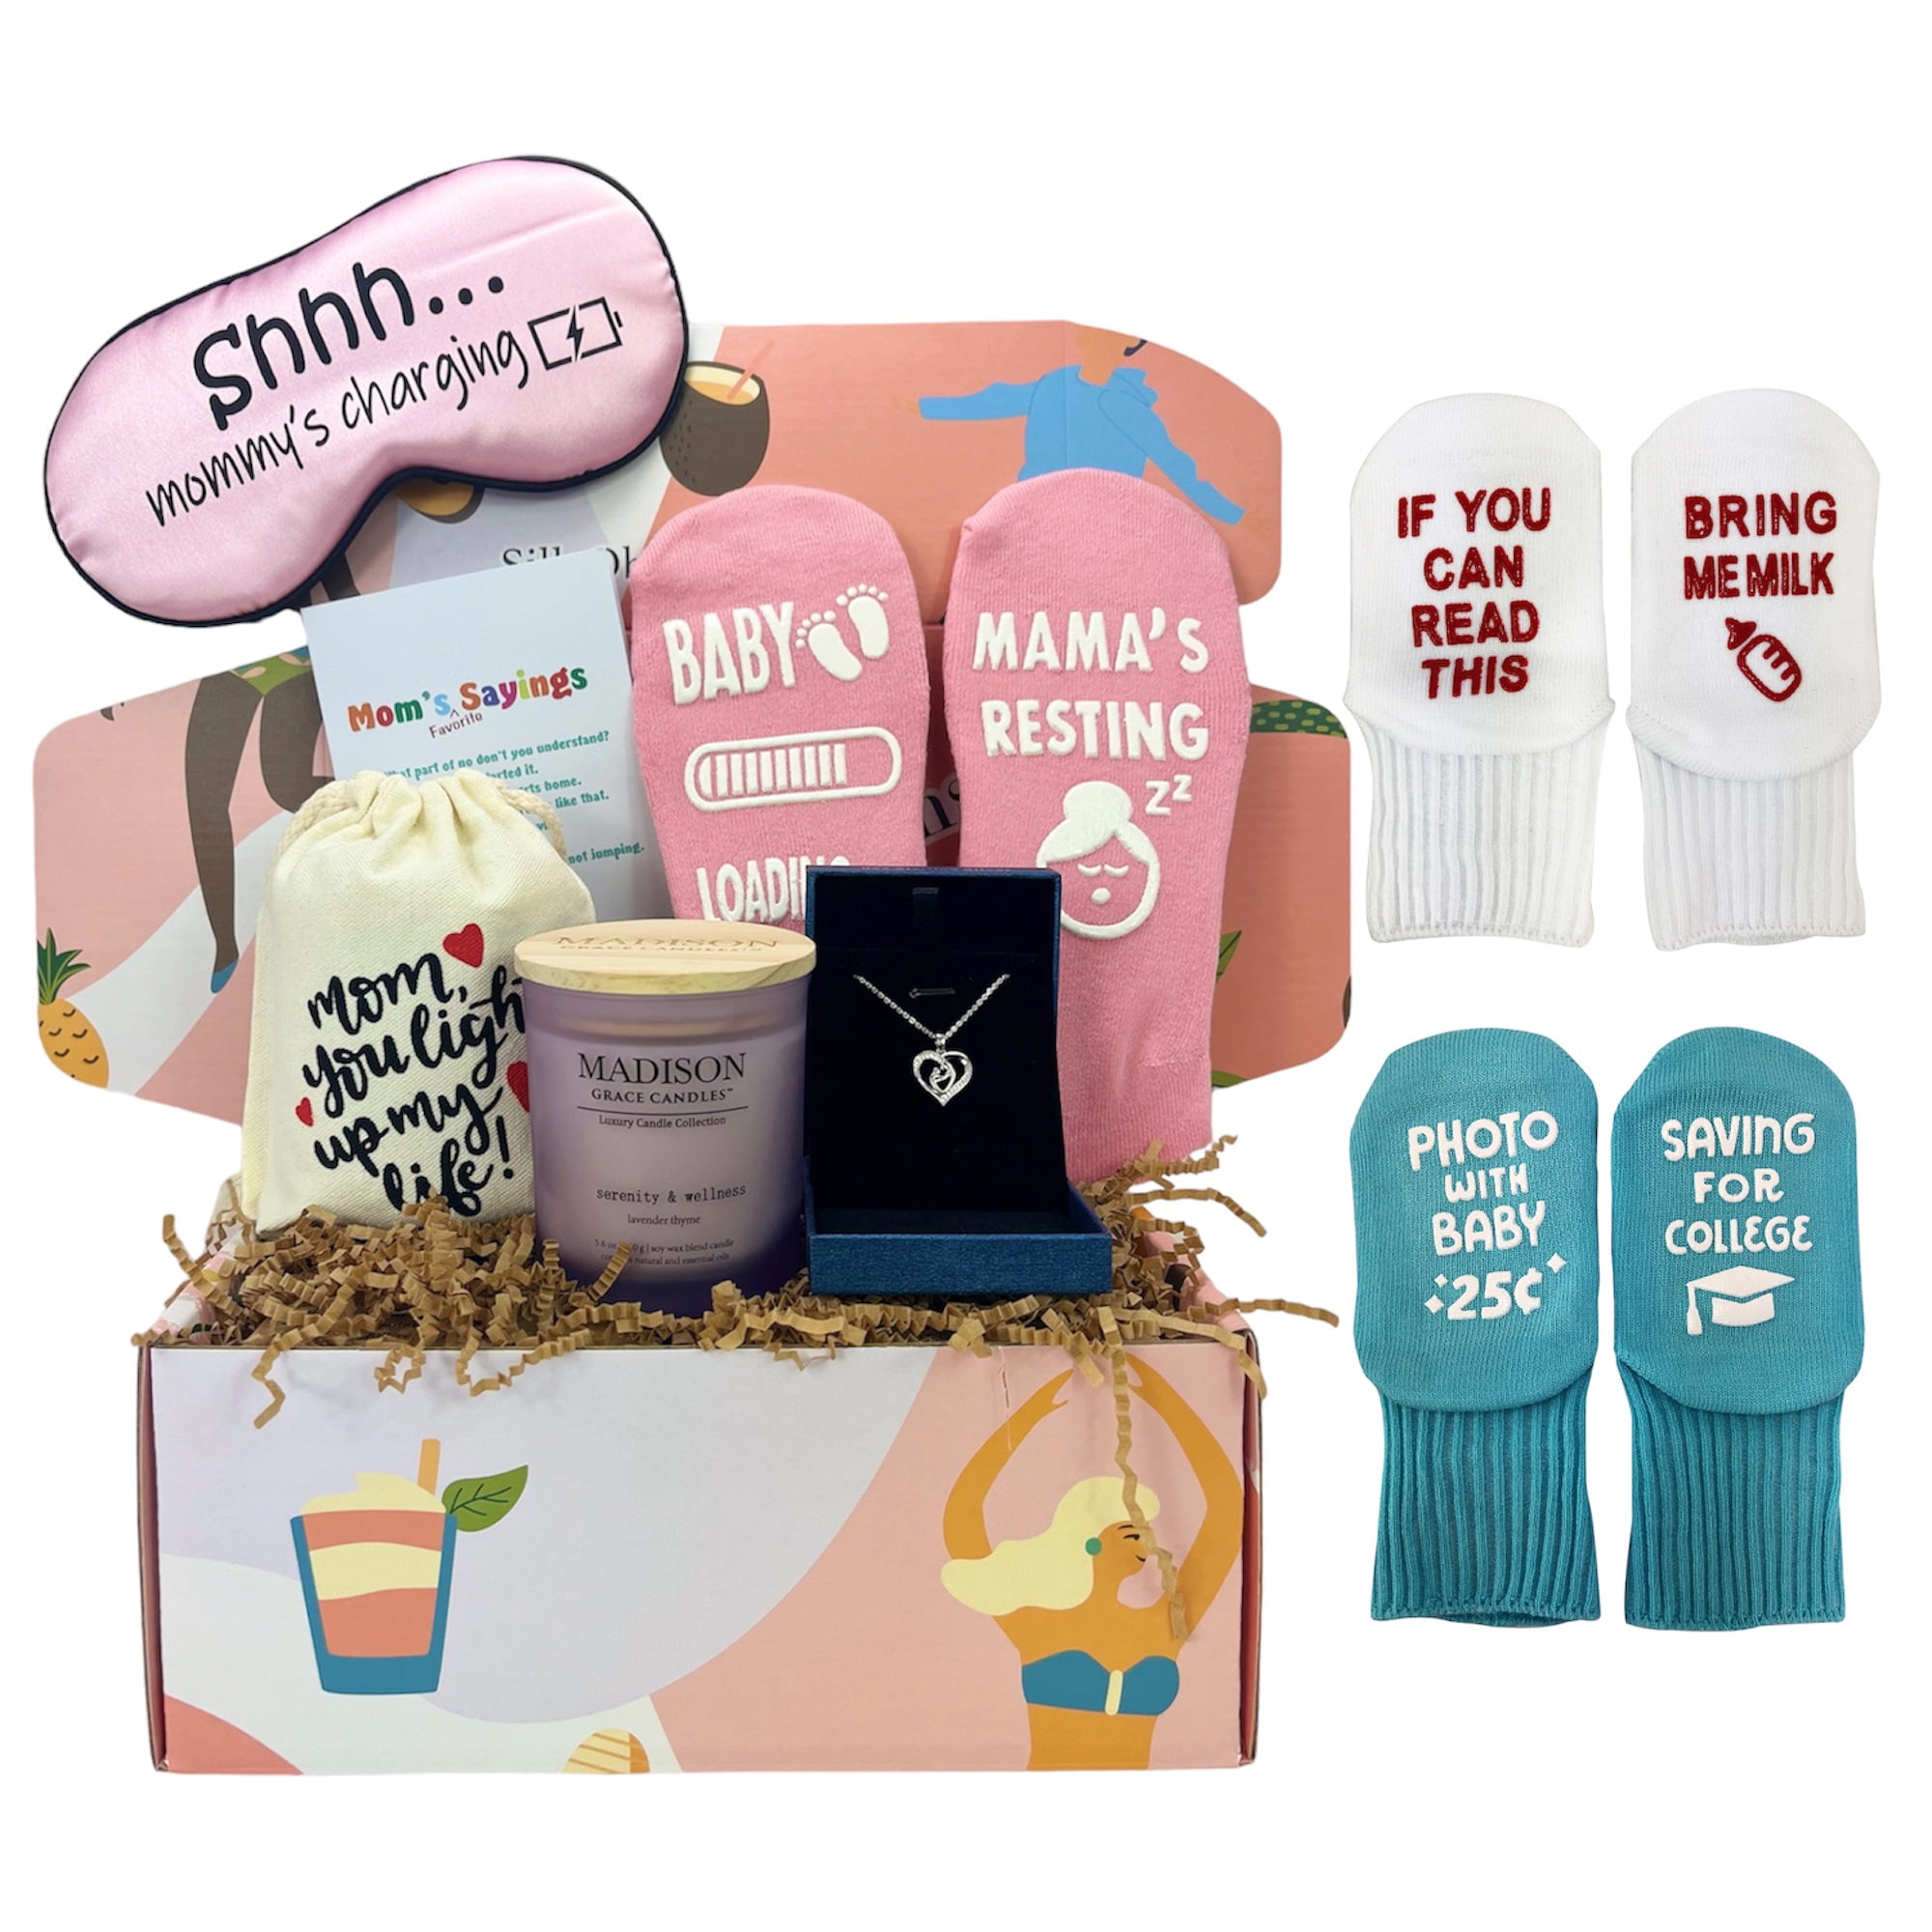 Silly Obsessions Gift Box for New Mom, Pregnant Mom, Great Gift Basket Set  for Baby Shower, Pregnant Women, Daughter, Wife, Friends, Mom to be.  (Pregnant Mom) 